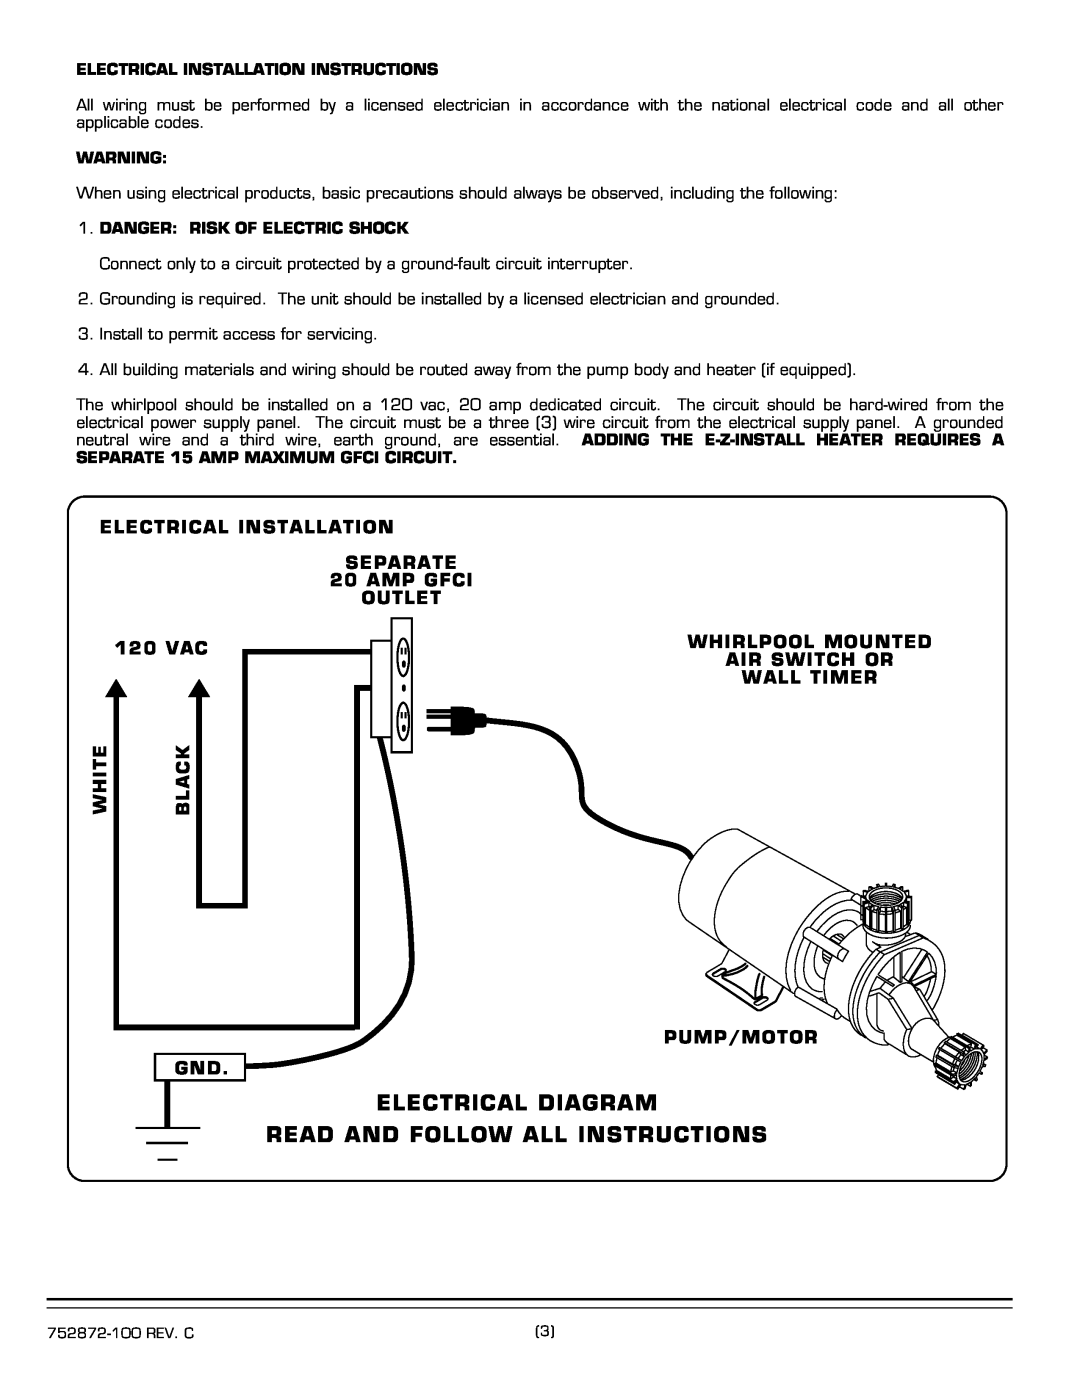 American Standard 2806E Electrical Diagram Read And Follow All Instructions, 120 VAC, White, Black 